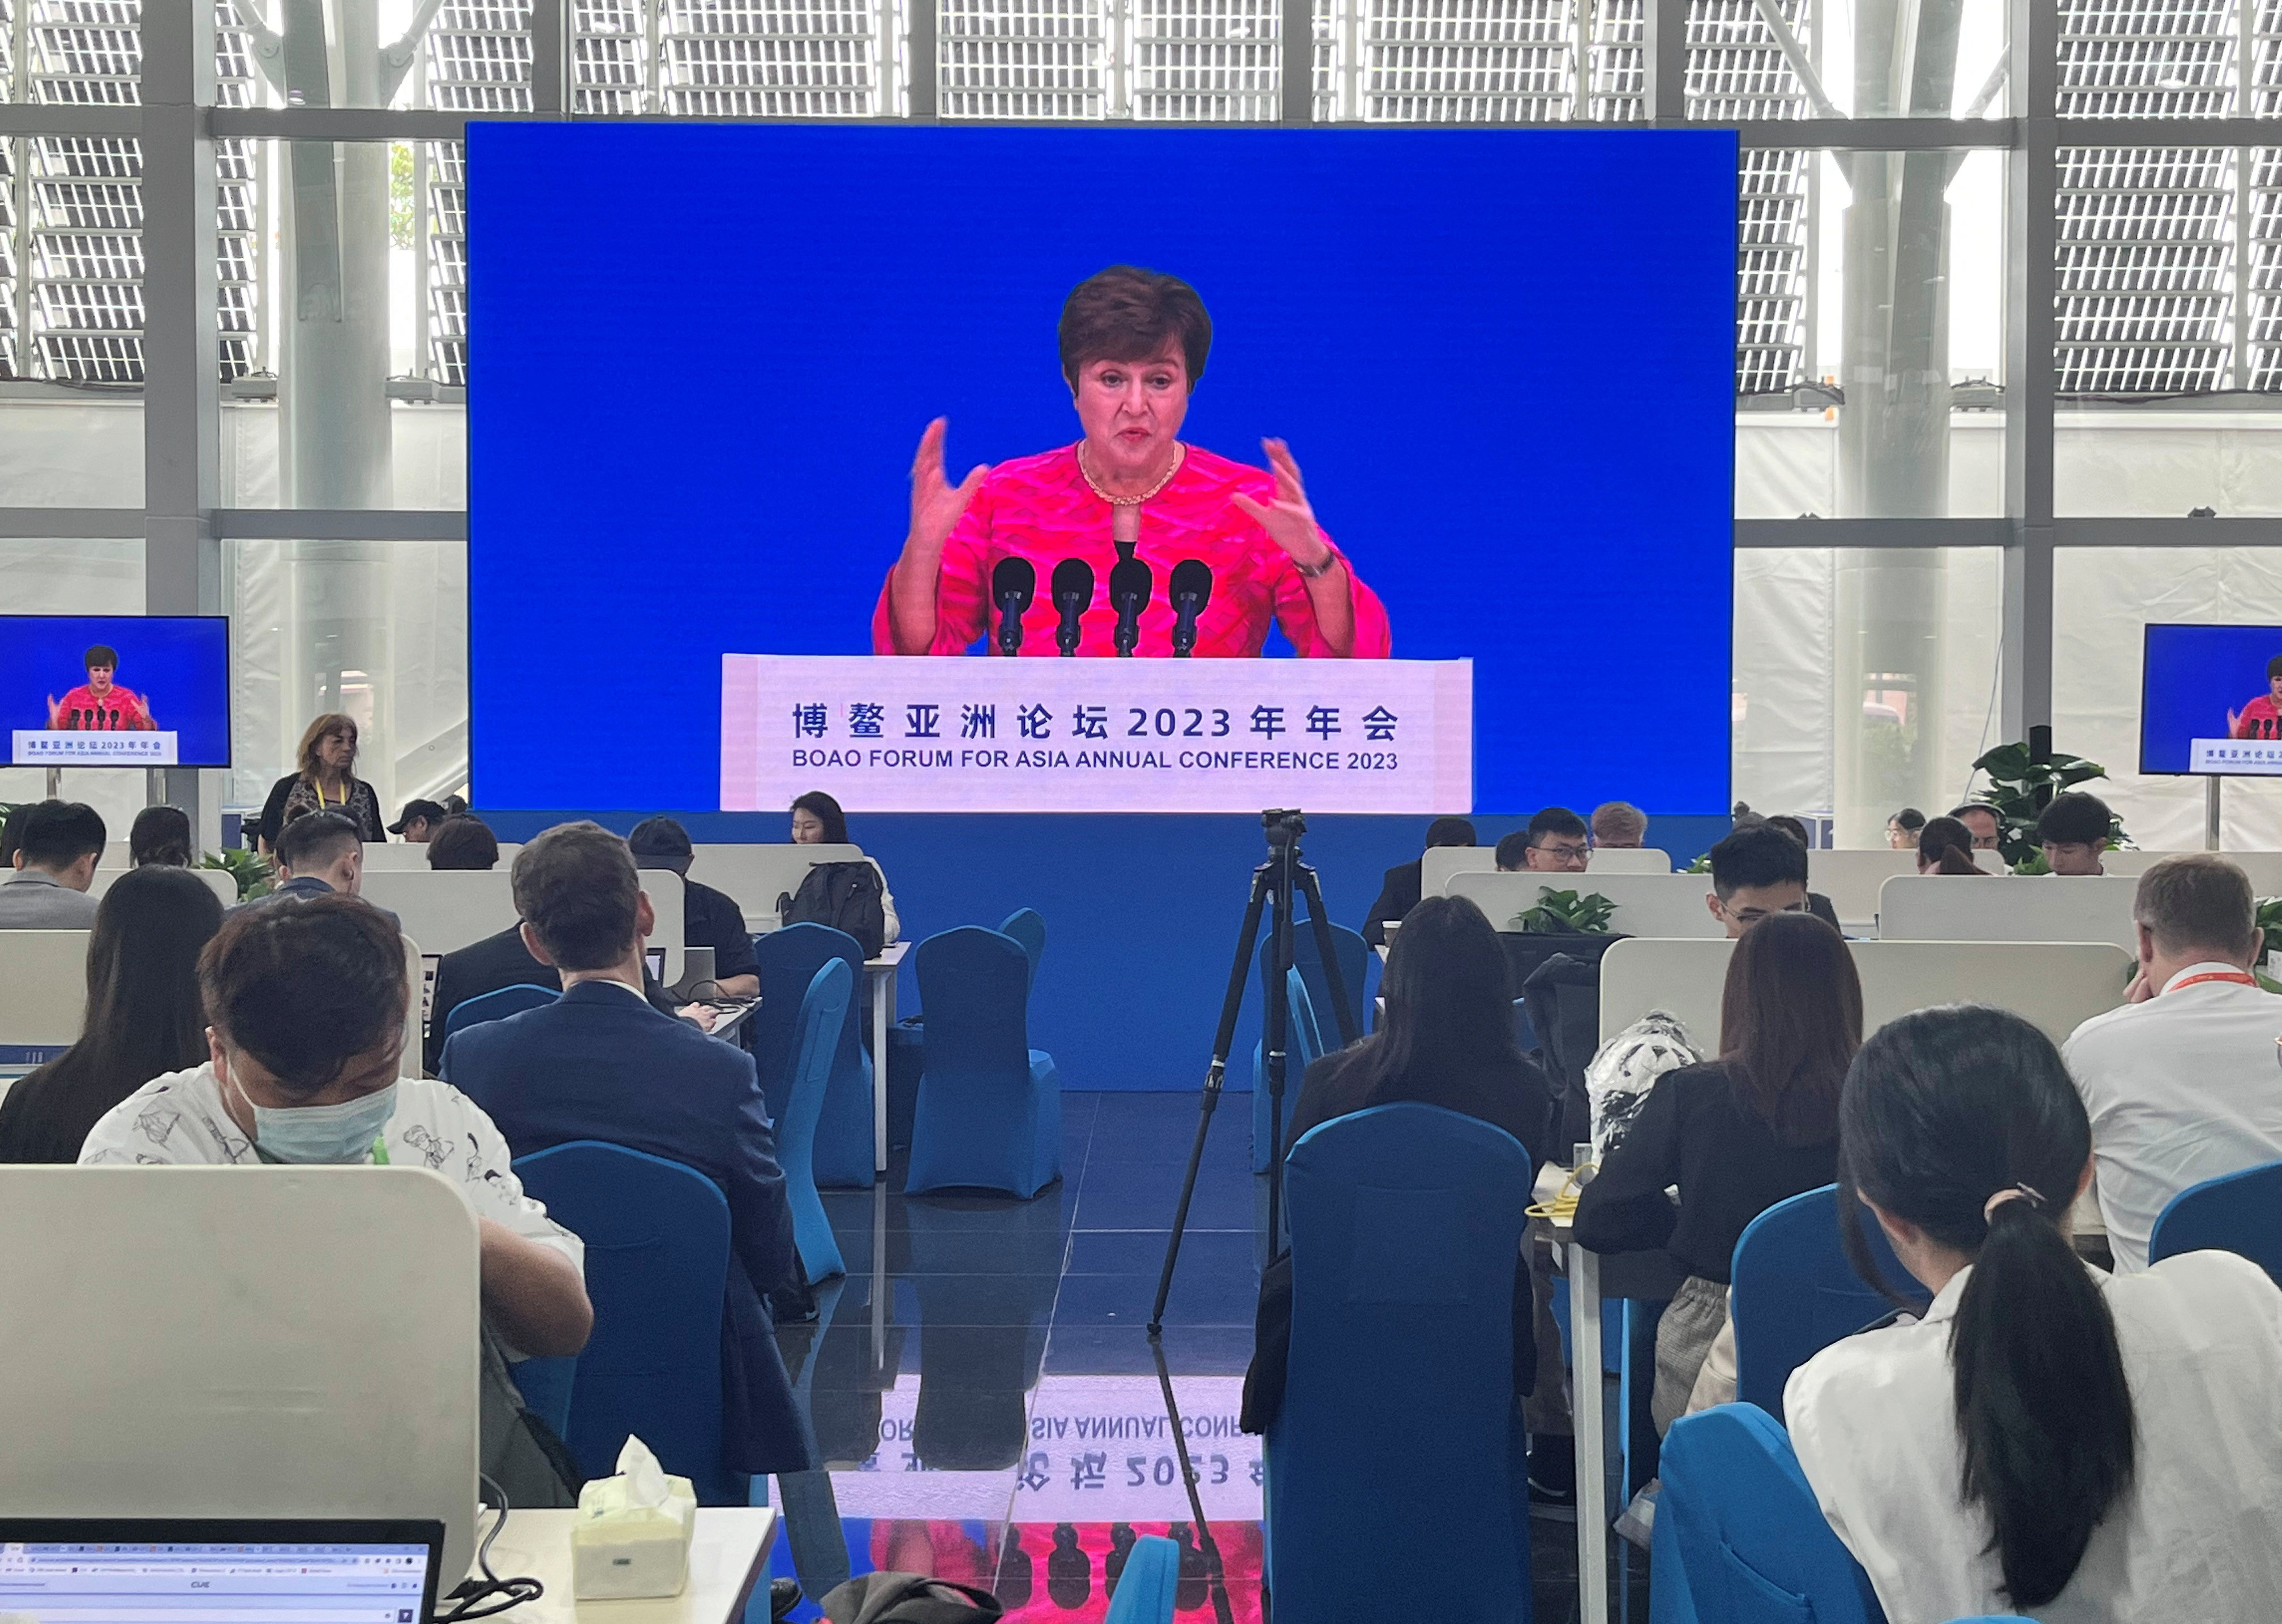 International Monetary Fund (IMF) managing director Kristalina Georgieva delivering a speech at the opening ceremony of the Boao Forum for Asia. Photo: Reuters